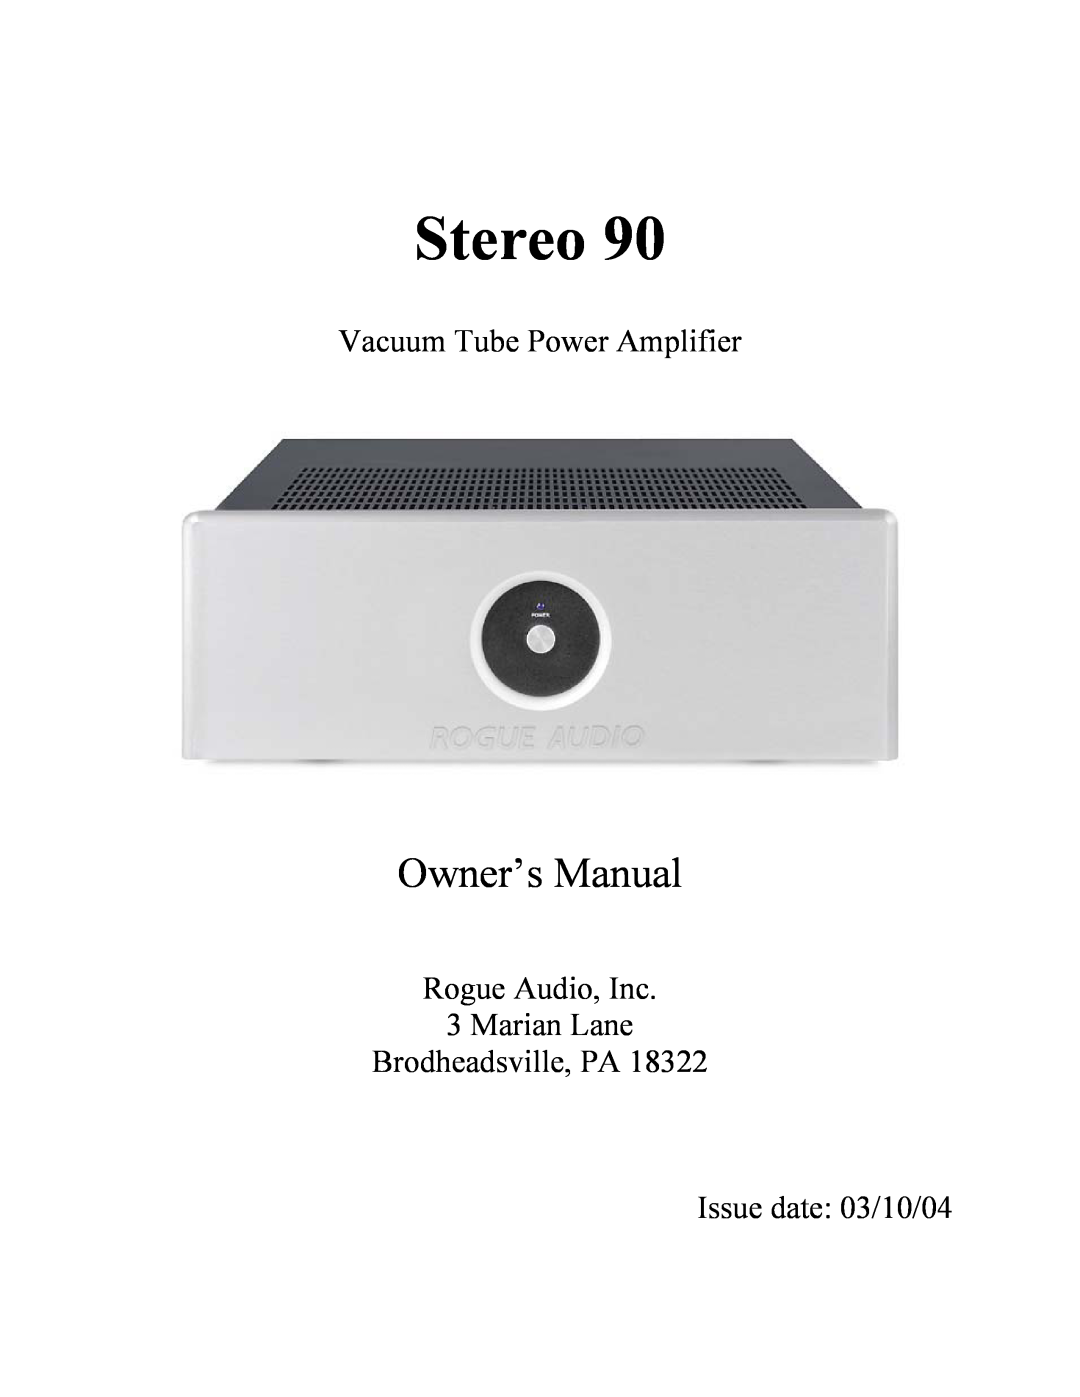 Rogue Audio Stereo 90 owner manual Vacuum Tube Power Amplifier, Rogue Audio, Inc 3 Marian Lane Brodheadsville, PA 